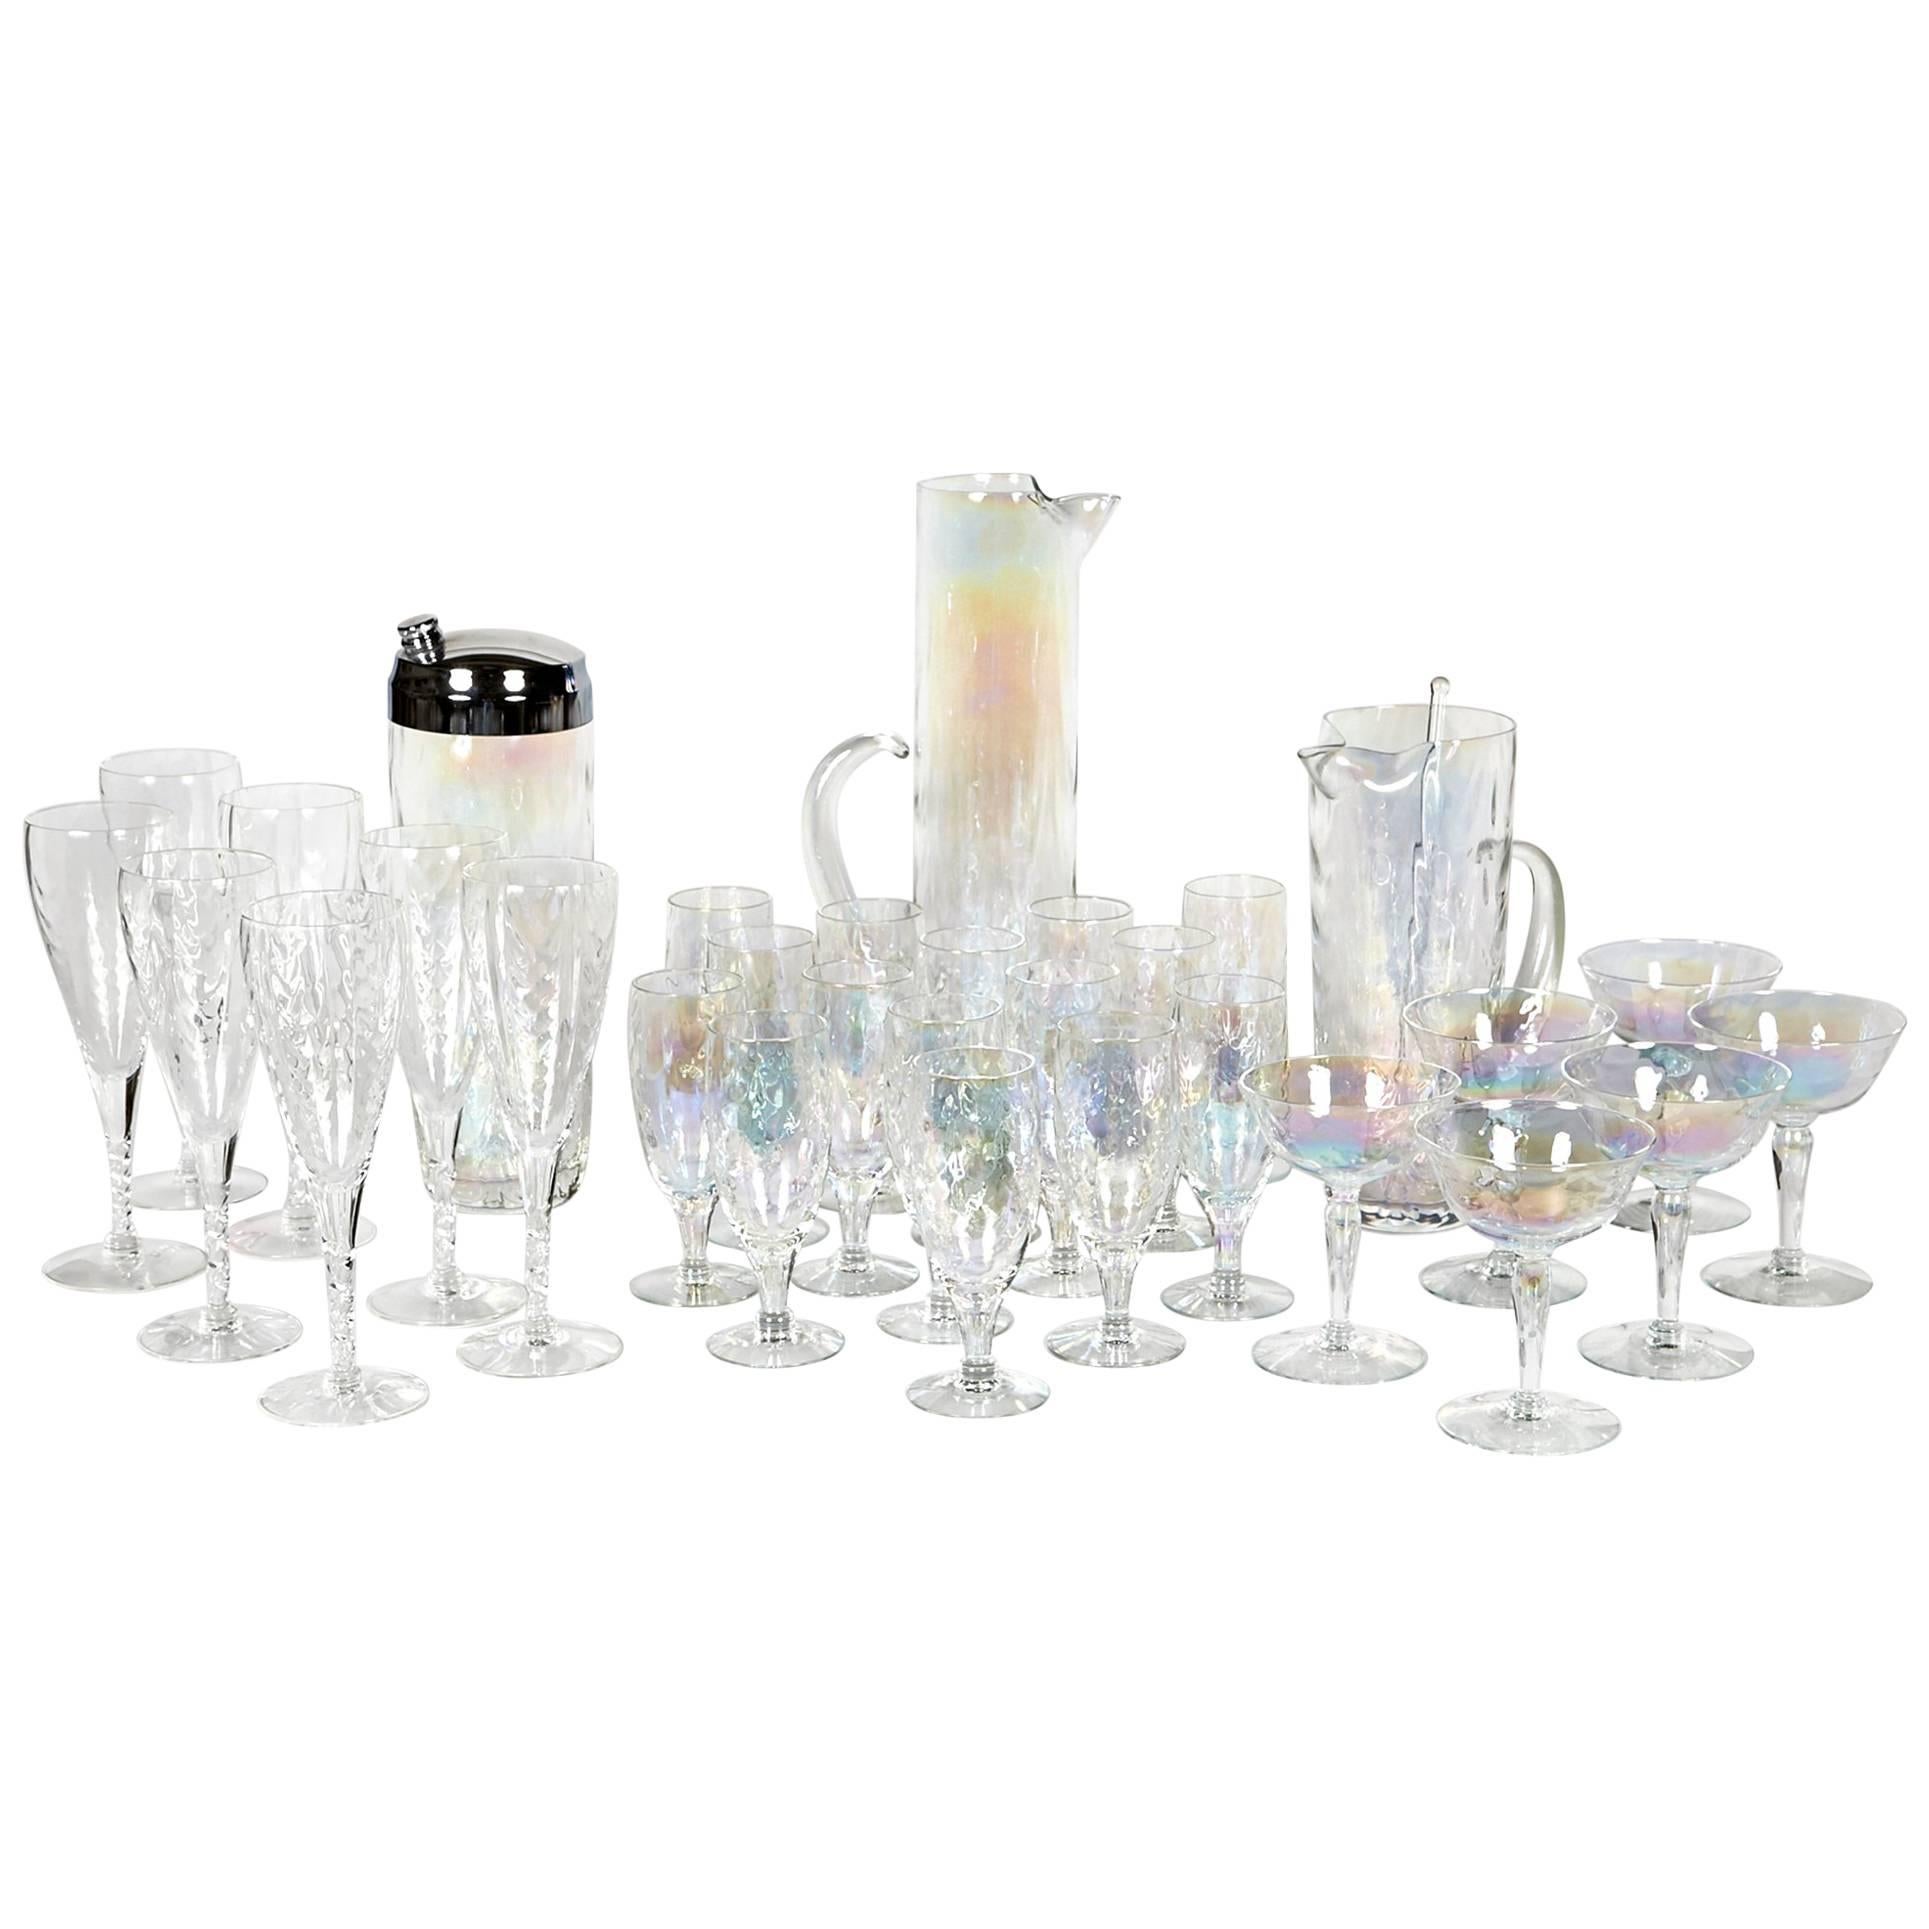 1950s Iridescent Glass Beverage Entertainment Set of 32 Pieces For Sale